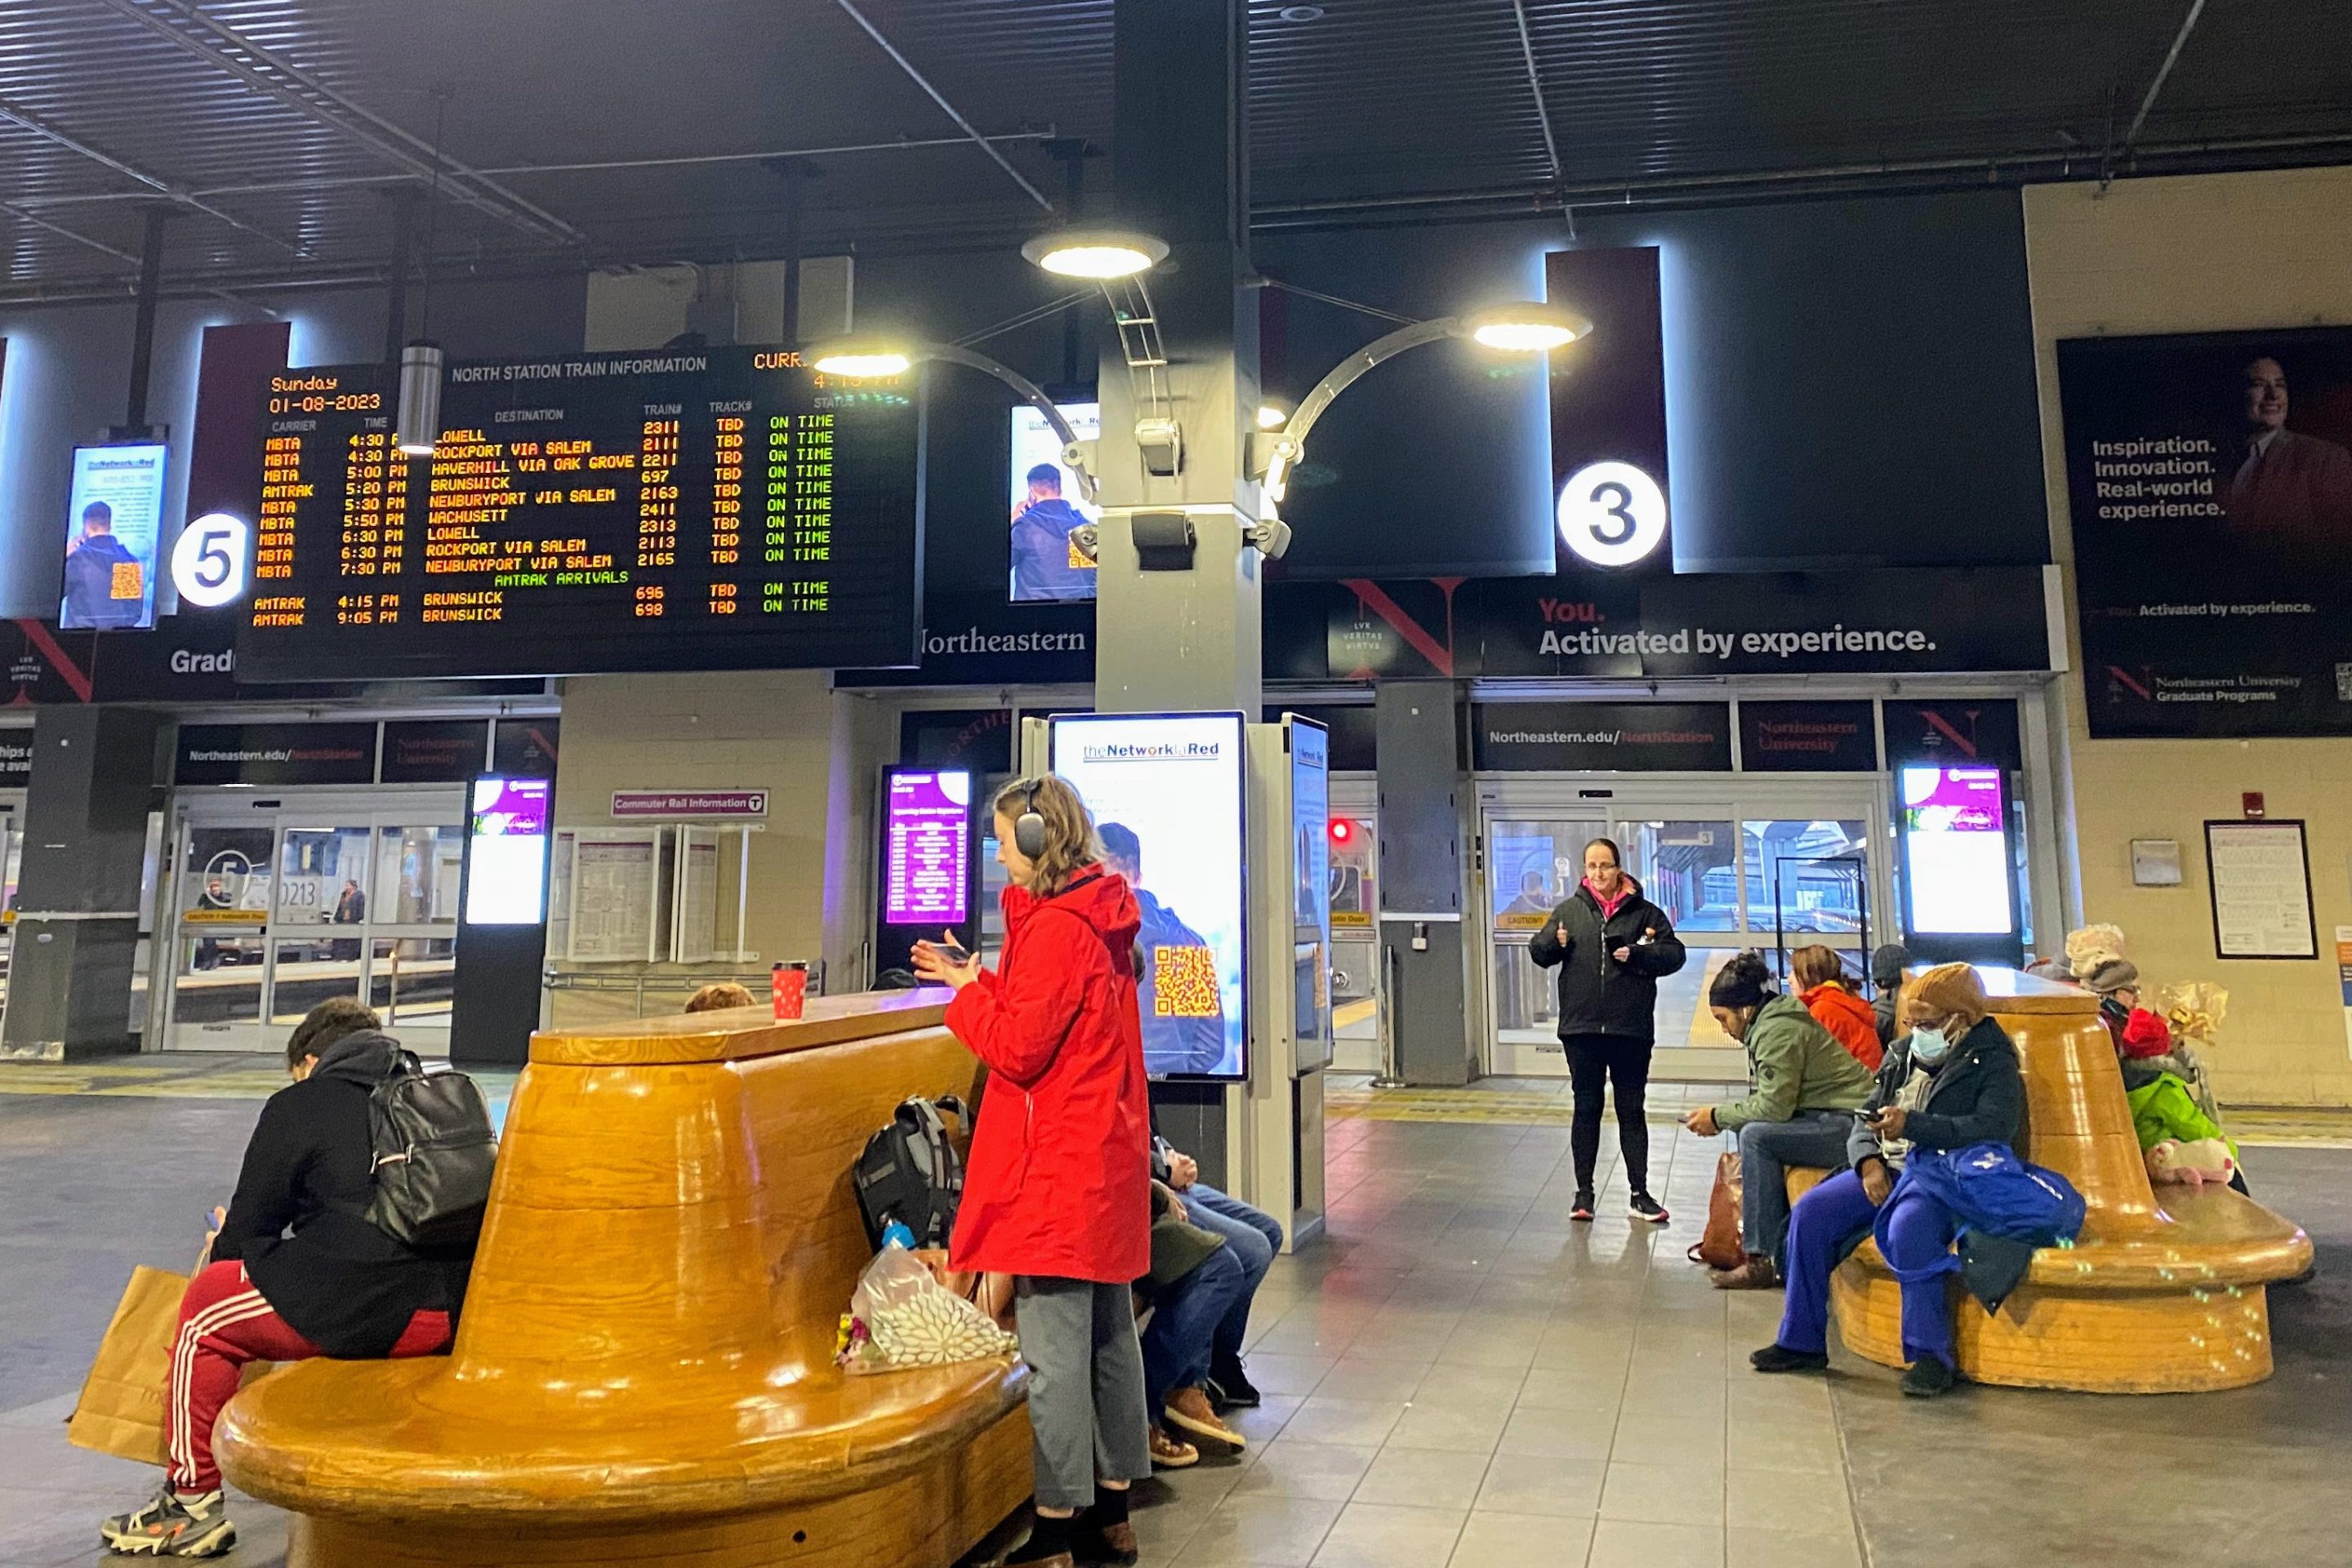 folks stand or sit on large wooden benches while waiting for their train inside North Station. The timetable hangs high in the background.